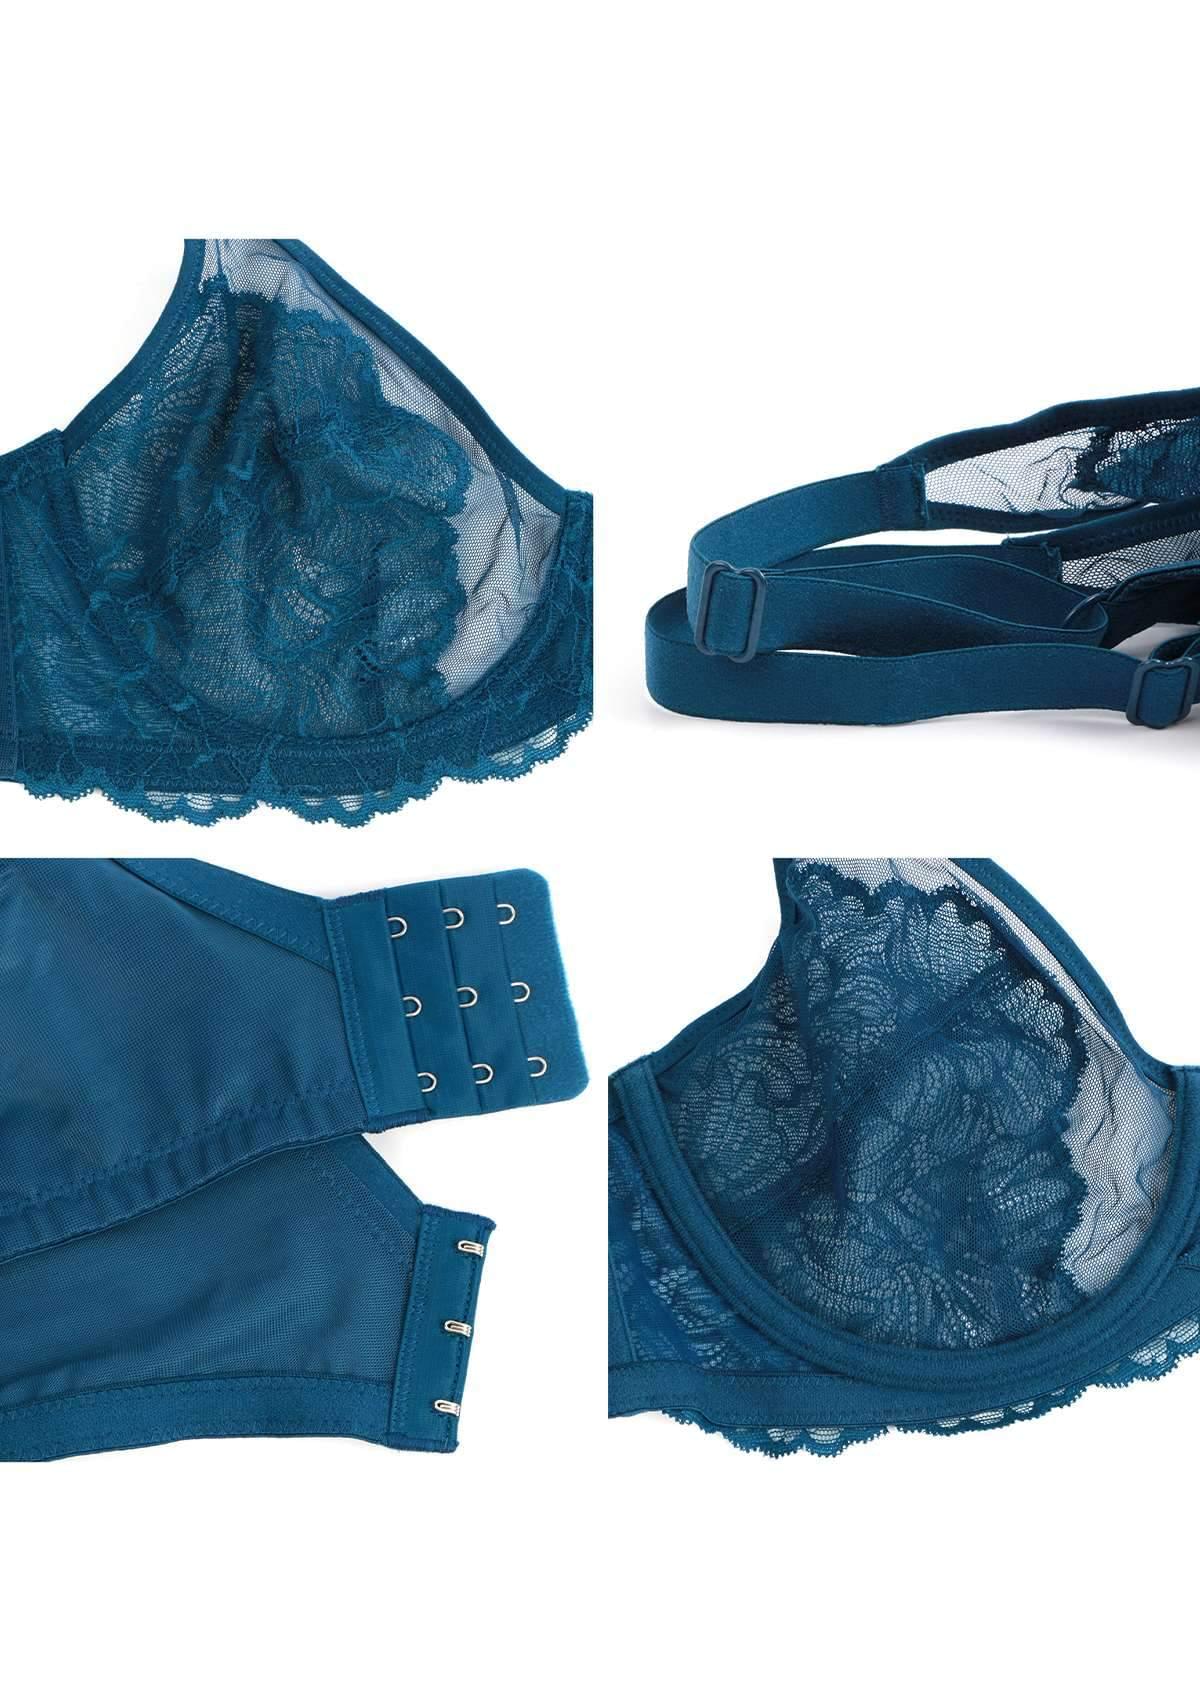 HSIA Blossom Lace Bra And Underwear Sets: Comfortable Plus Size Bra - Biscay Blue / 40 / D